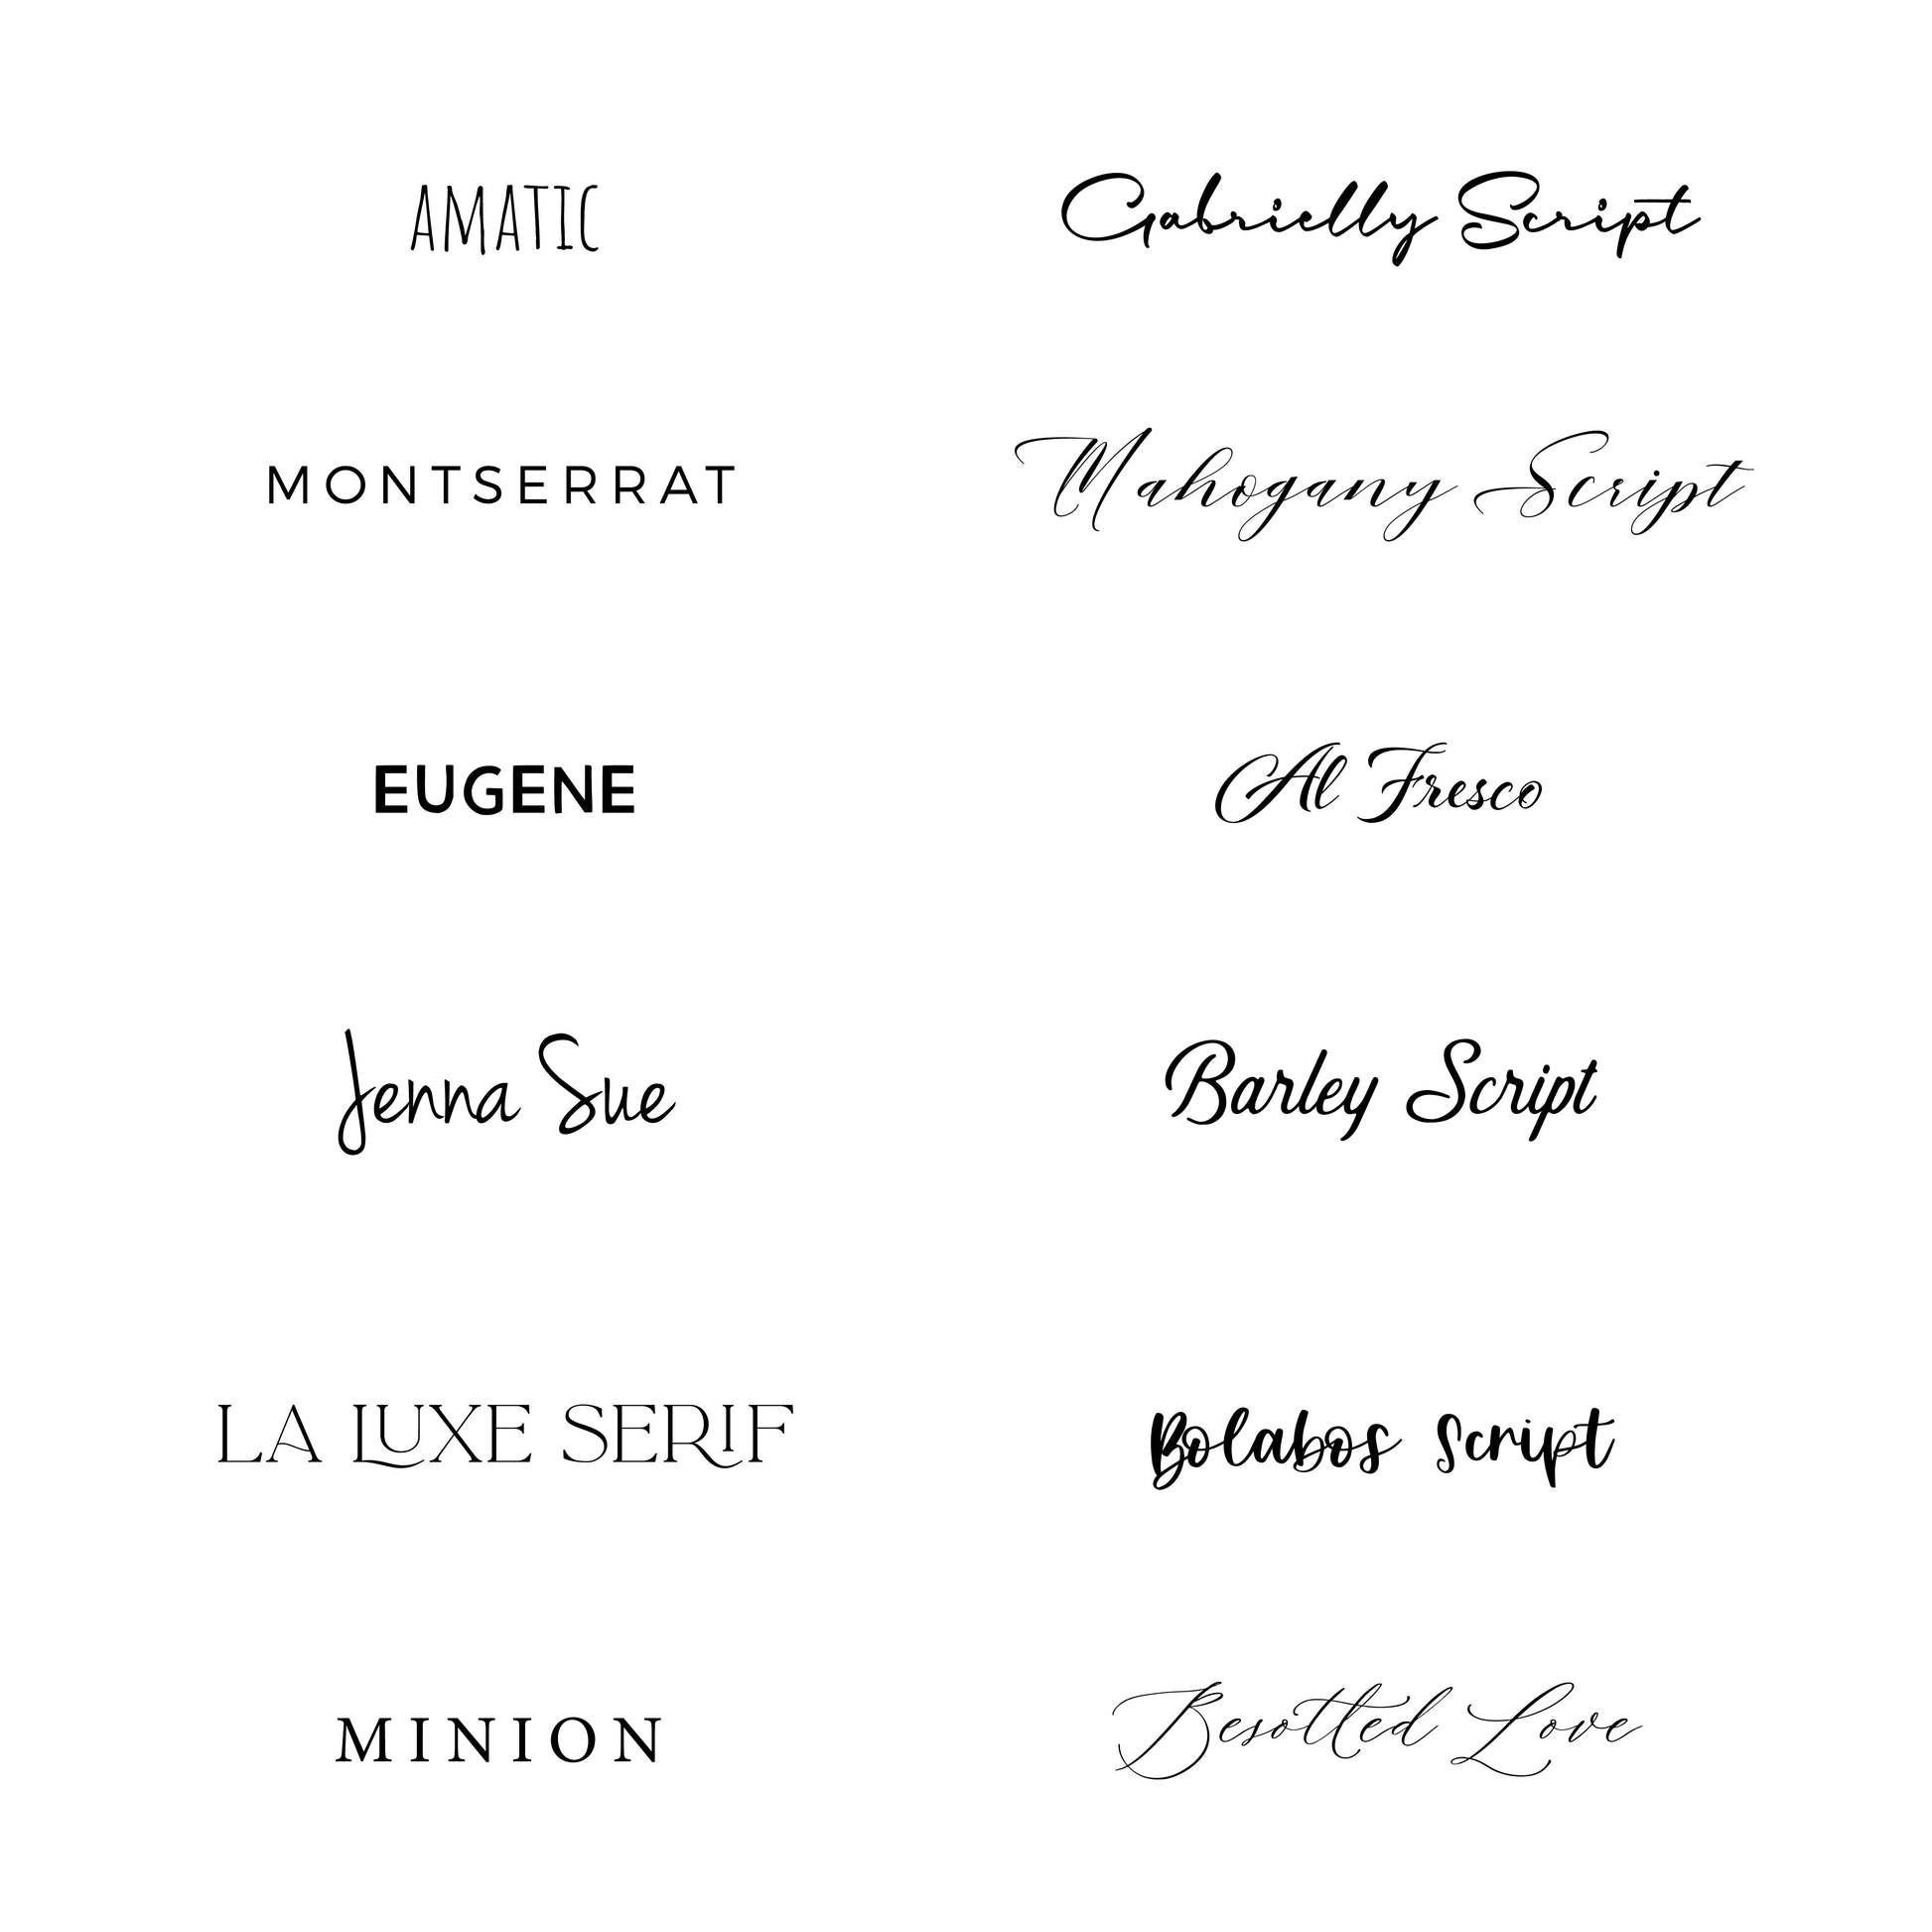 Choose your font for your custom letterpress stationery, personalized your note cards with 12 font options to choose from